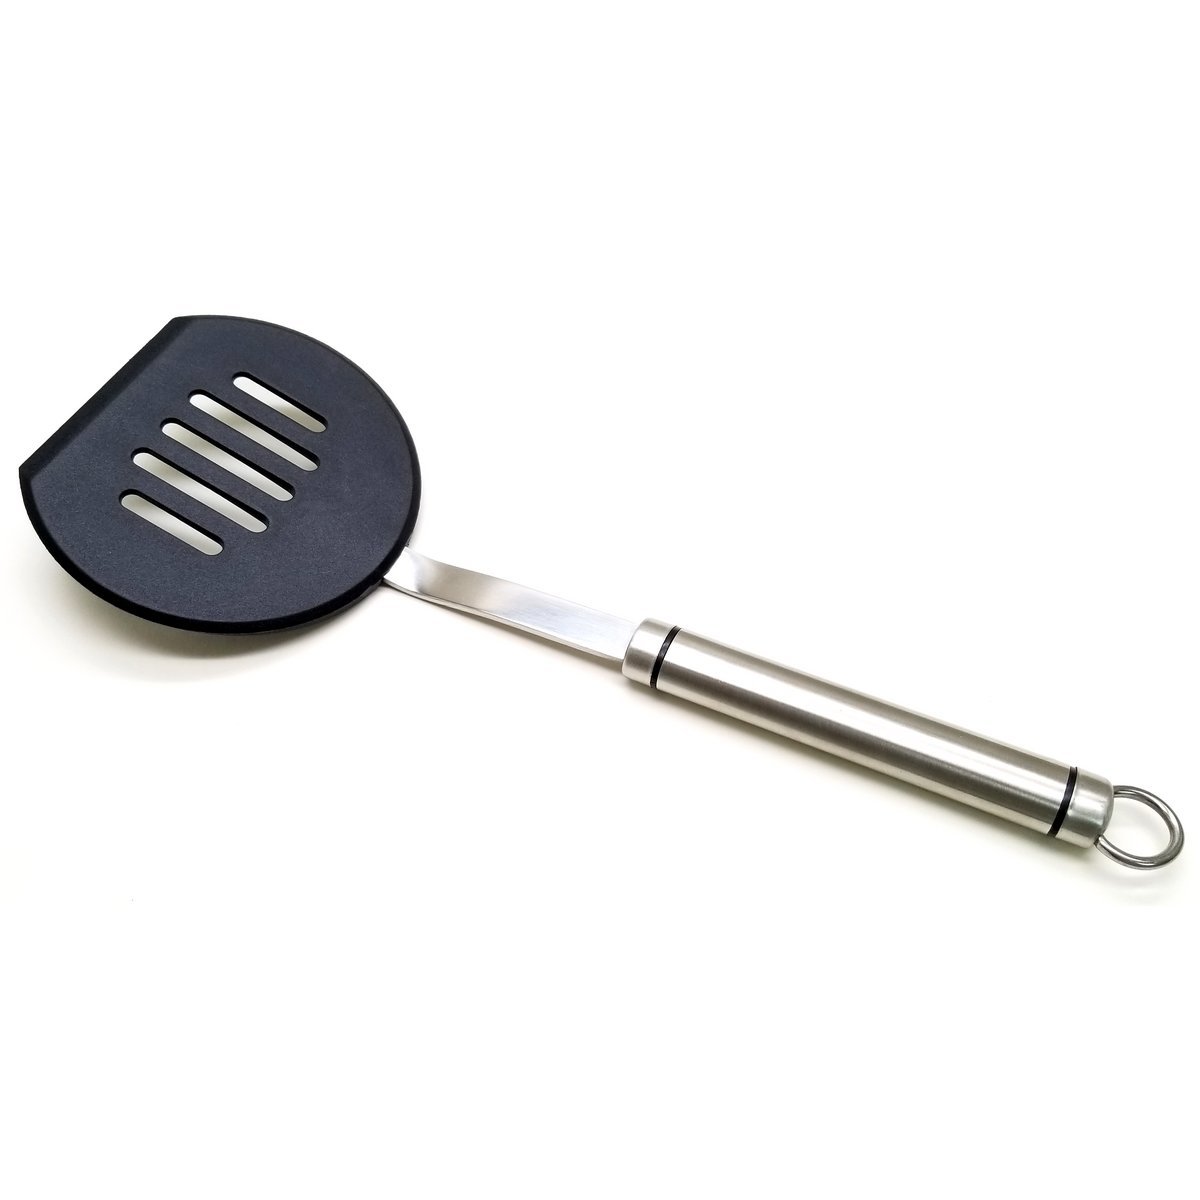 Nylon round turner with high-grade stainless steel handle